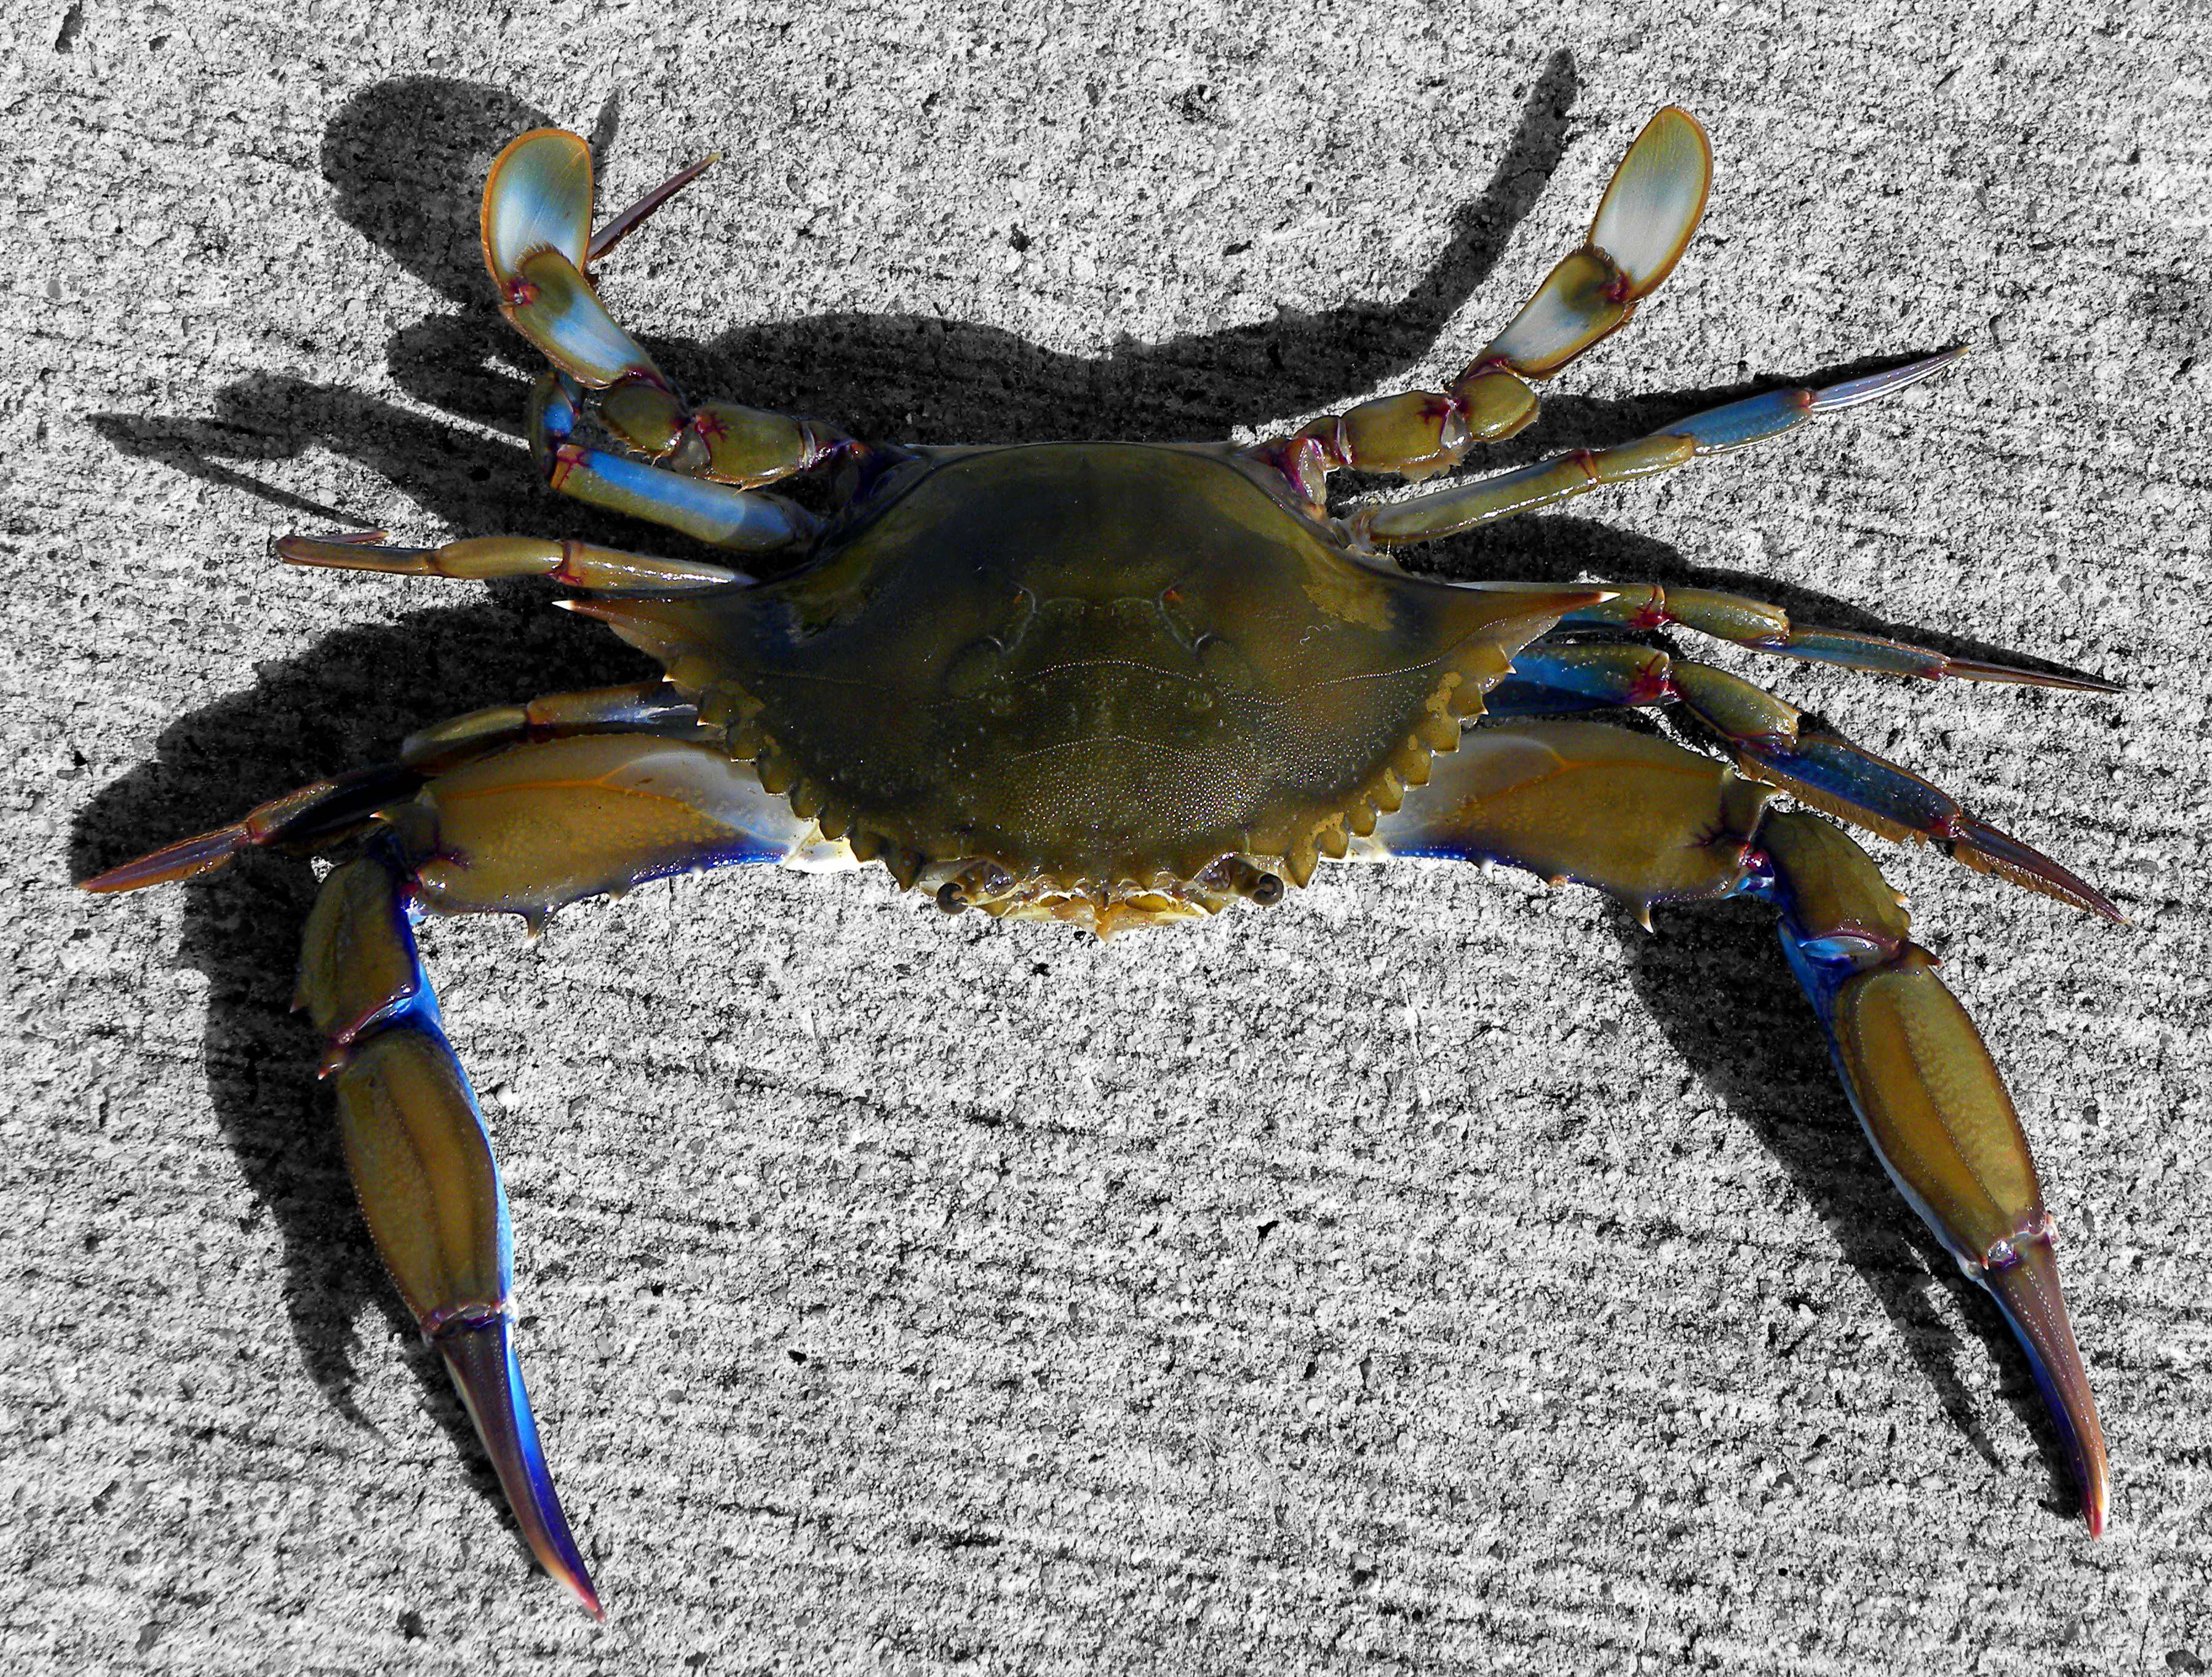 Blue Claw Crab Pictures ~ Maryland Blue Claw Crab | Bodaswasuas